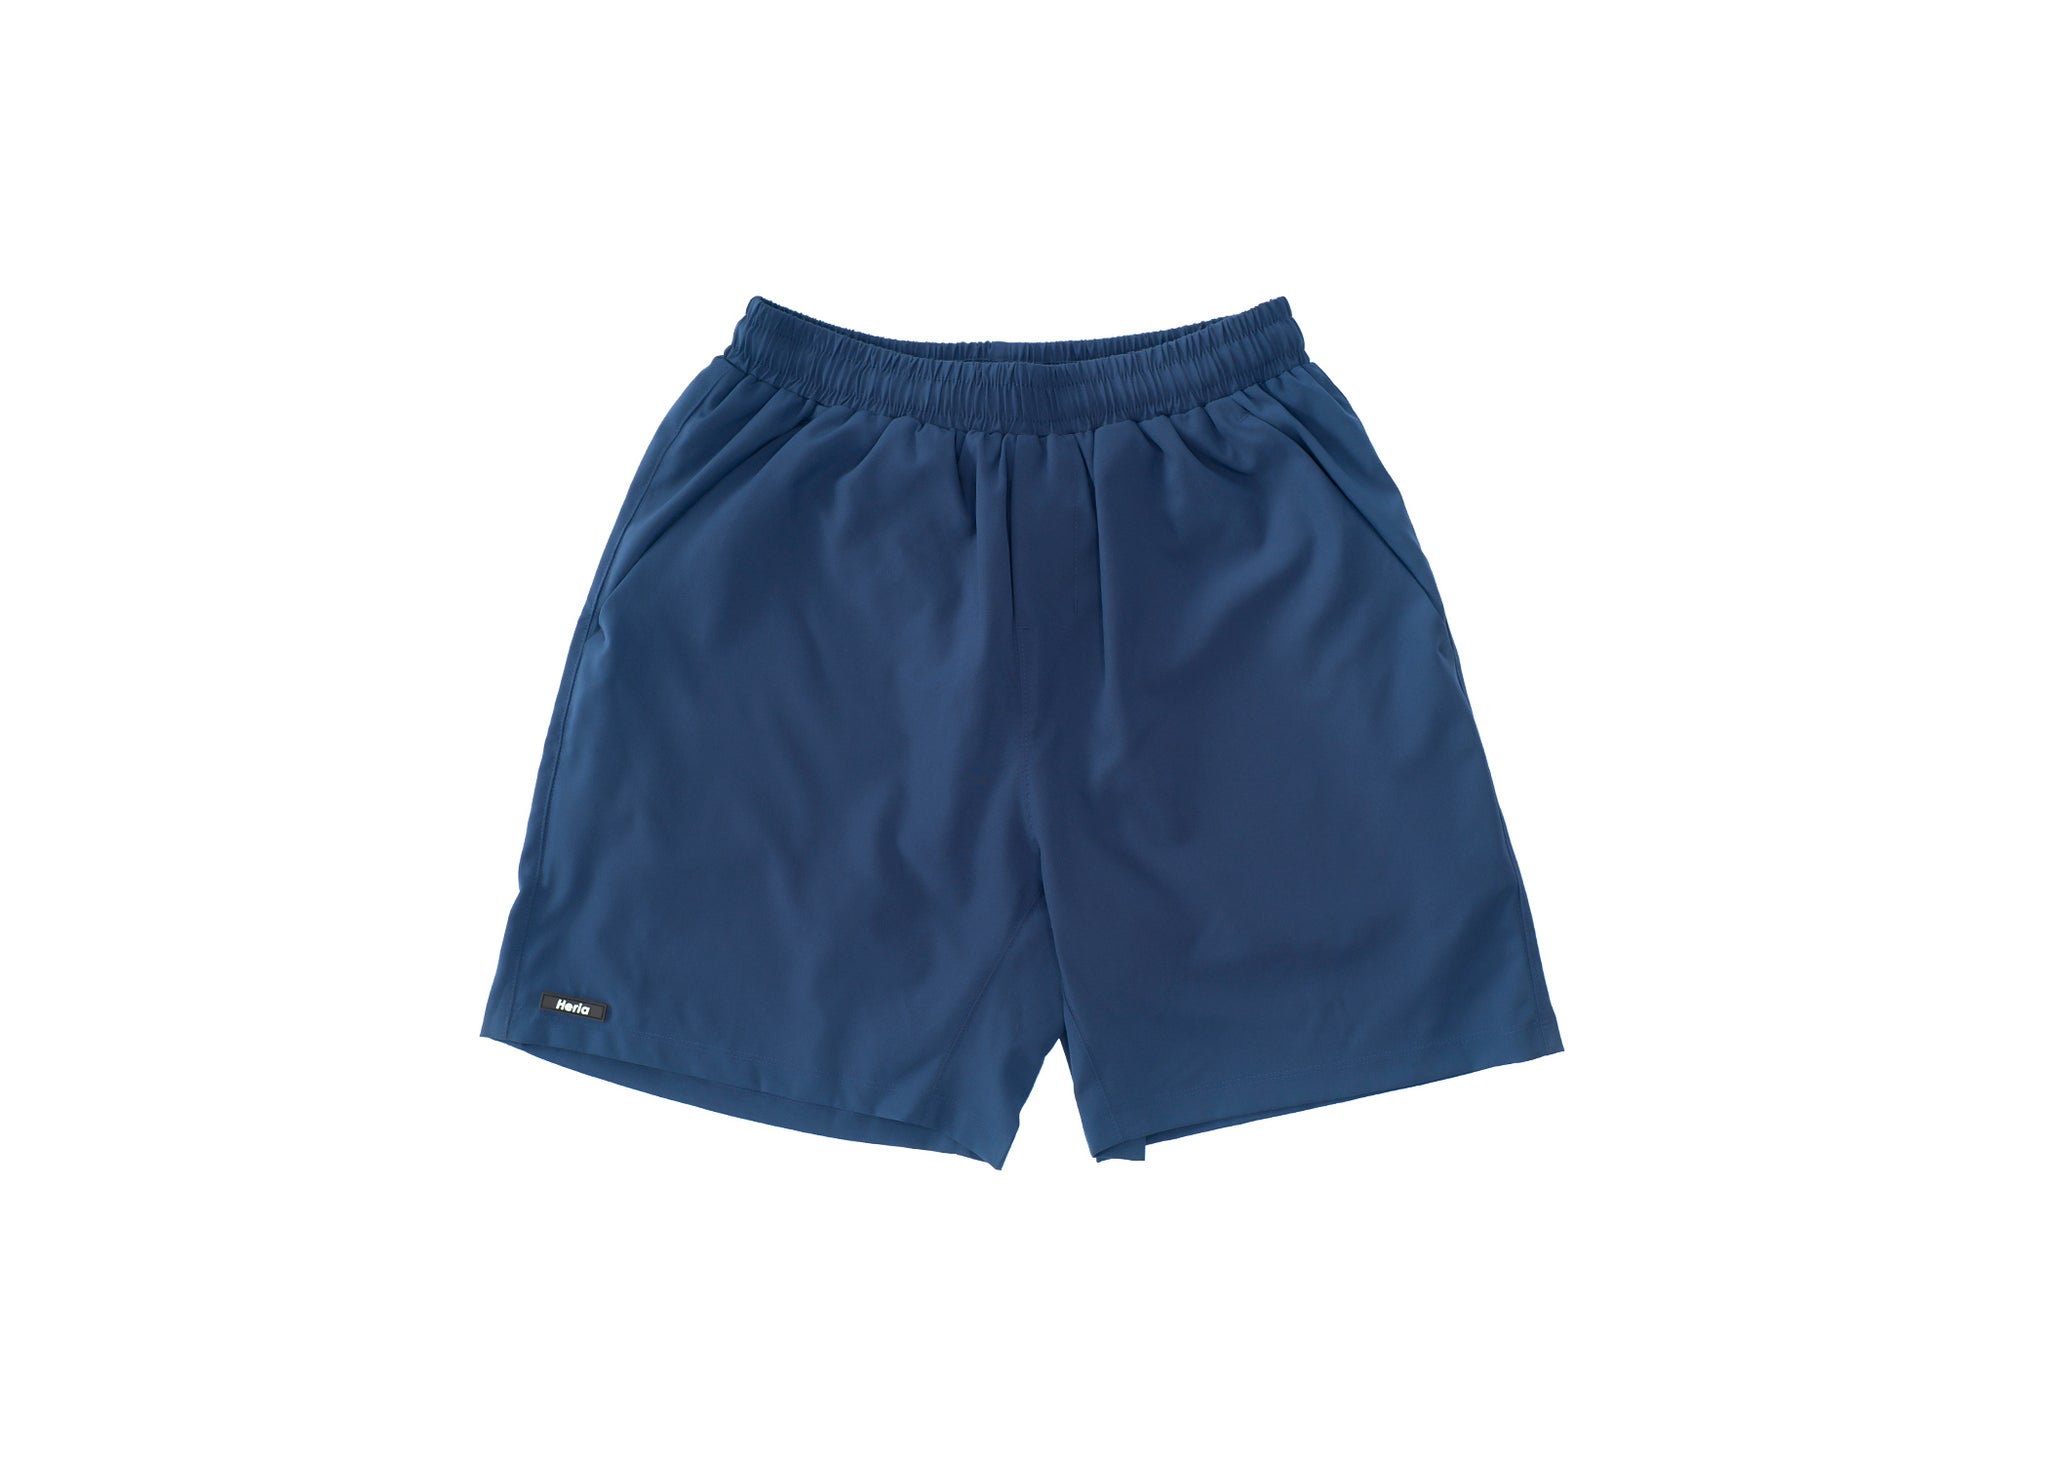 Heria Shorts - Solid Blue (4629602074666)